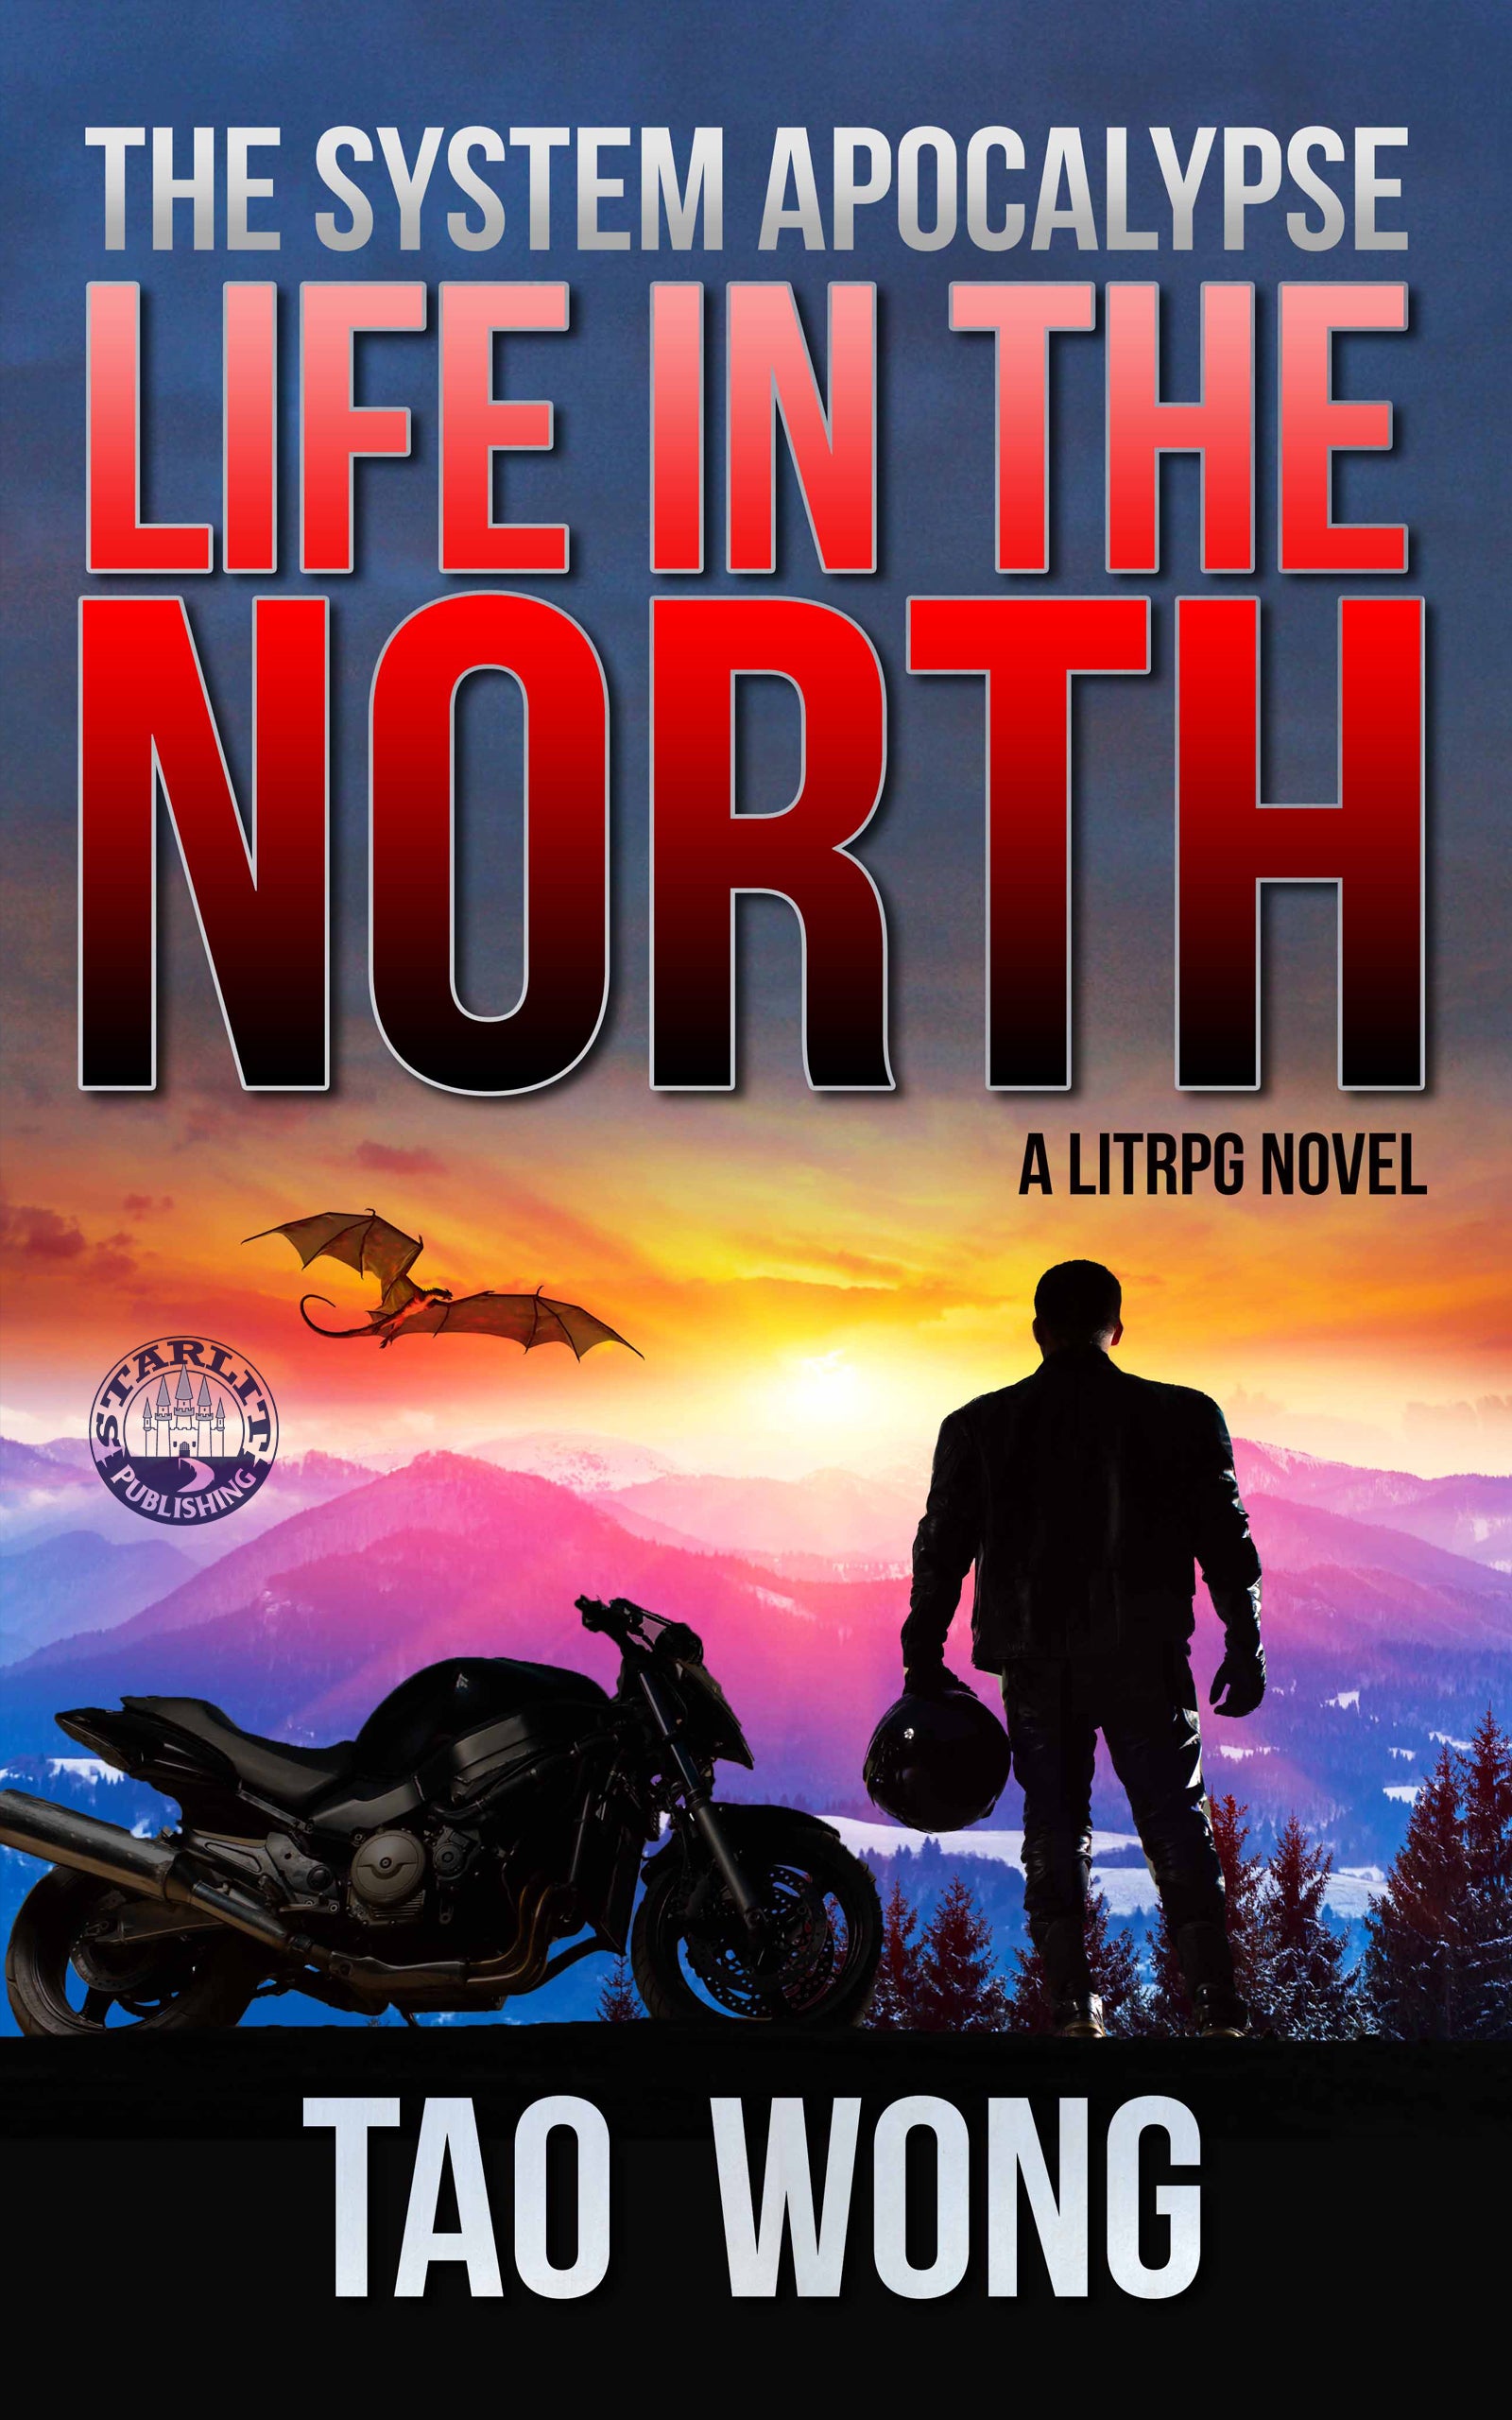 The System Apocalypse: Life in the North (book 1)